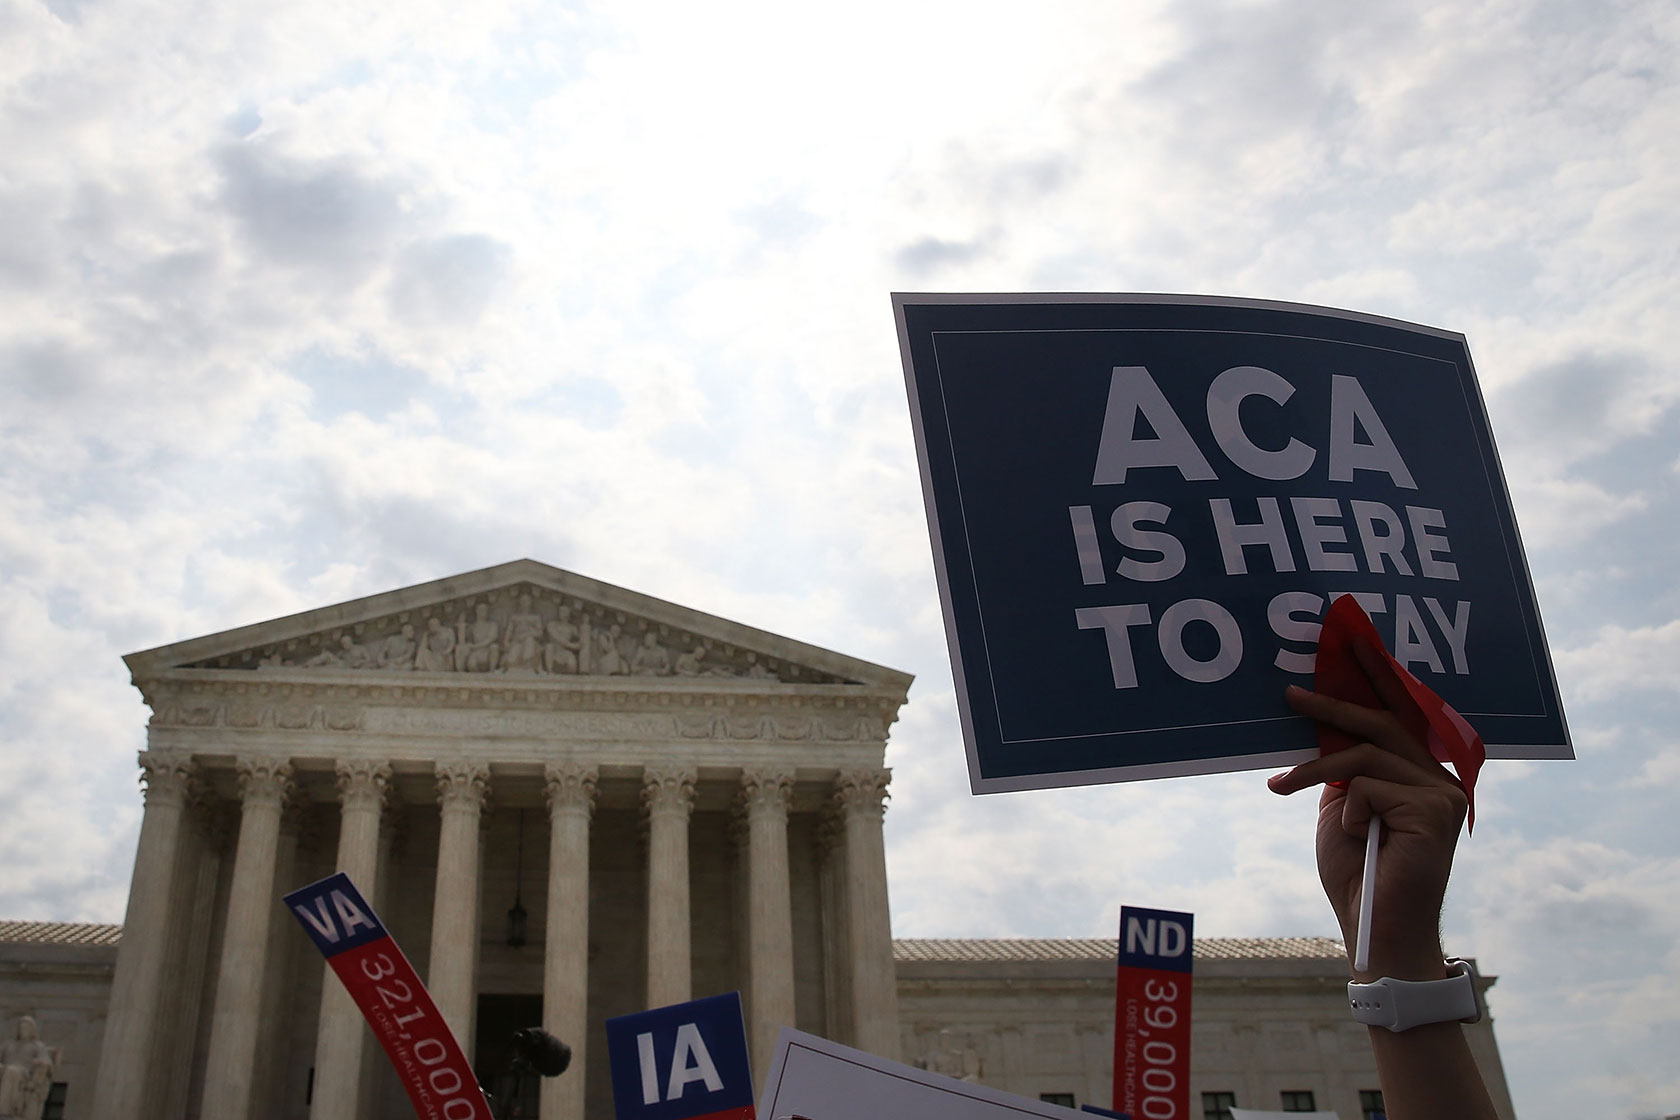 A sign is held up during a rally for the Affordable Care Act.